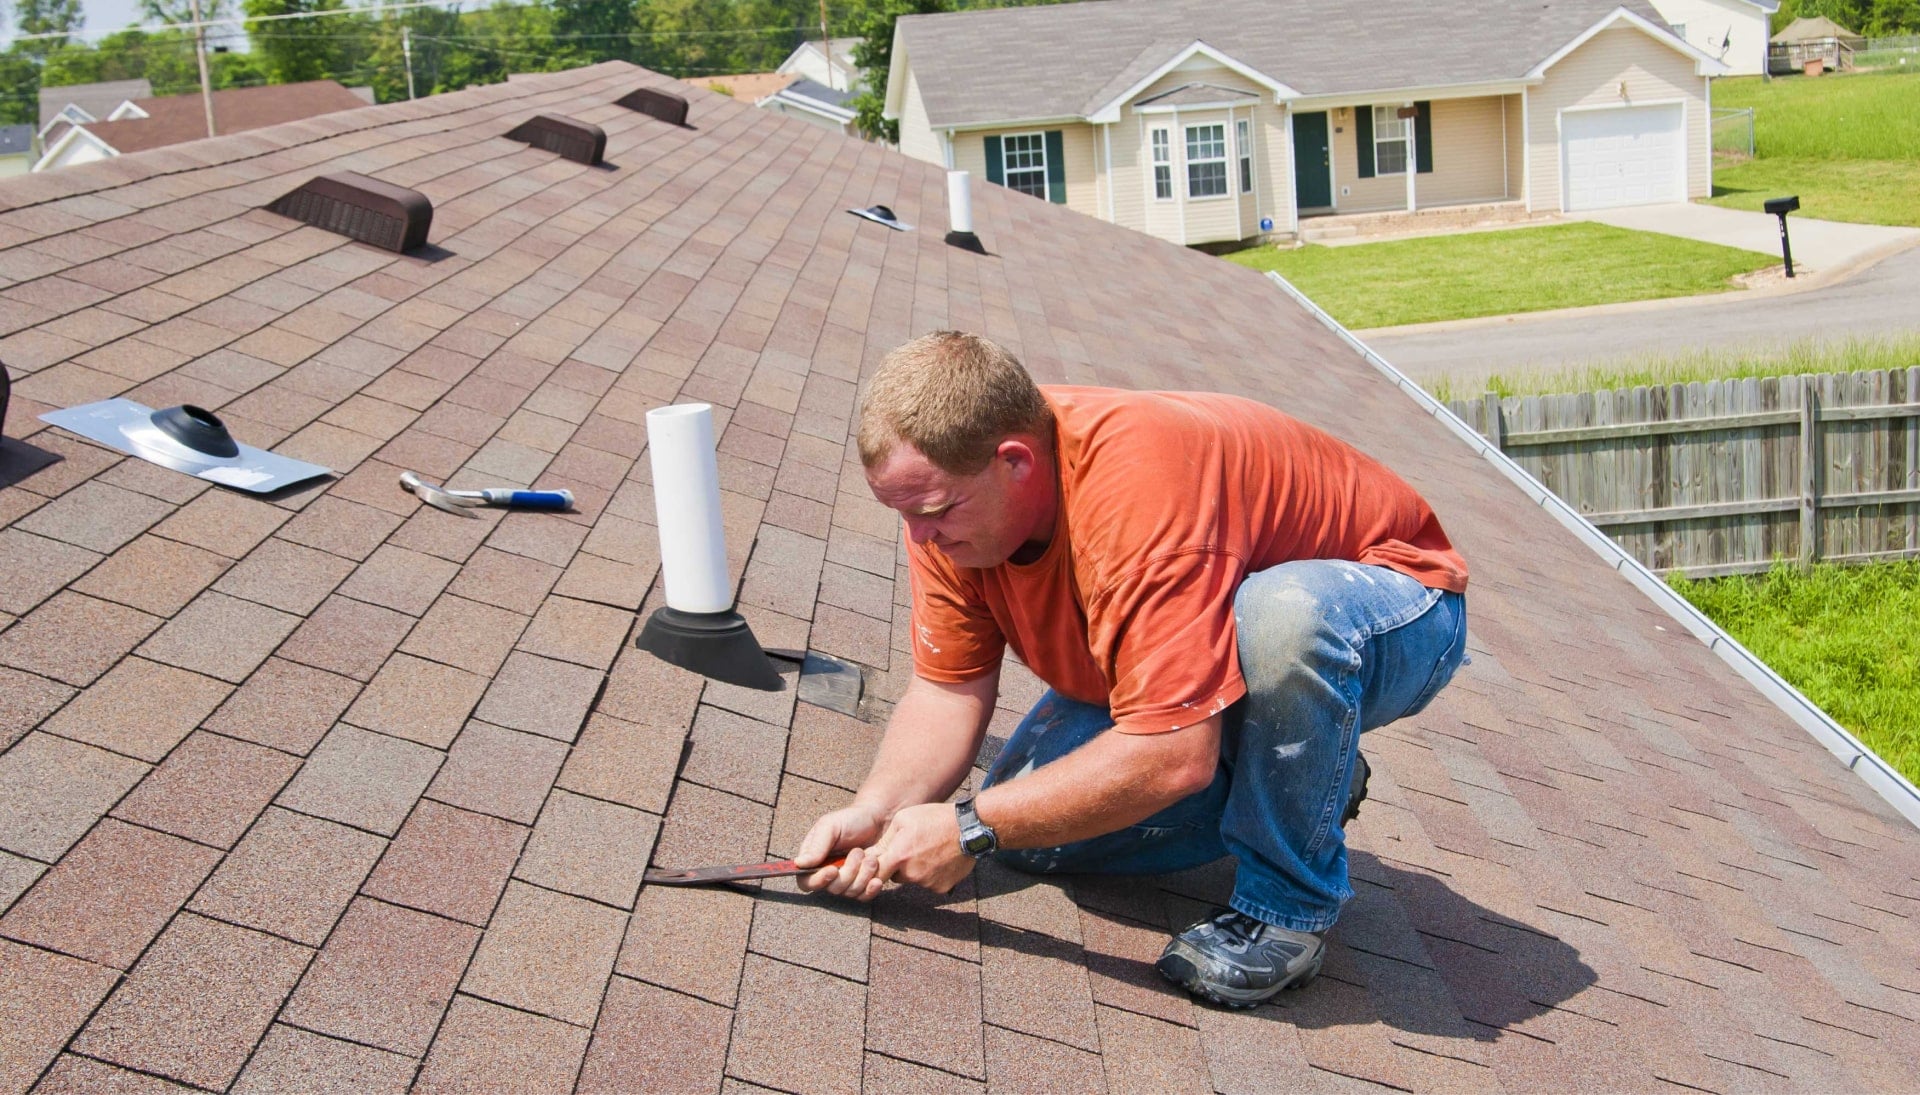 Dependable Roof and shingle repair experts in Des Moines, Iowa committed to customer satisfaction.